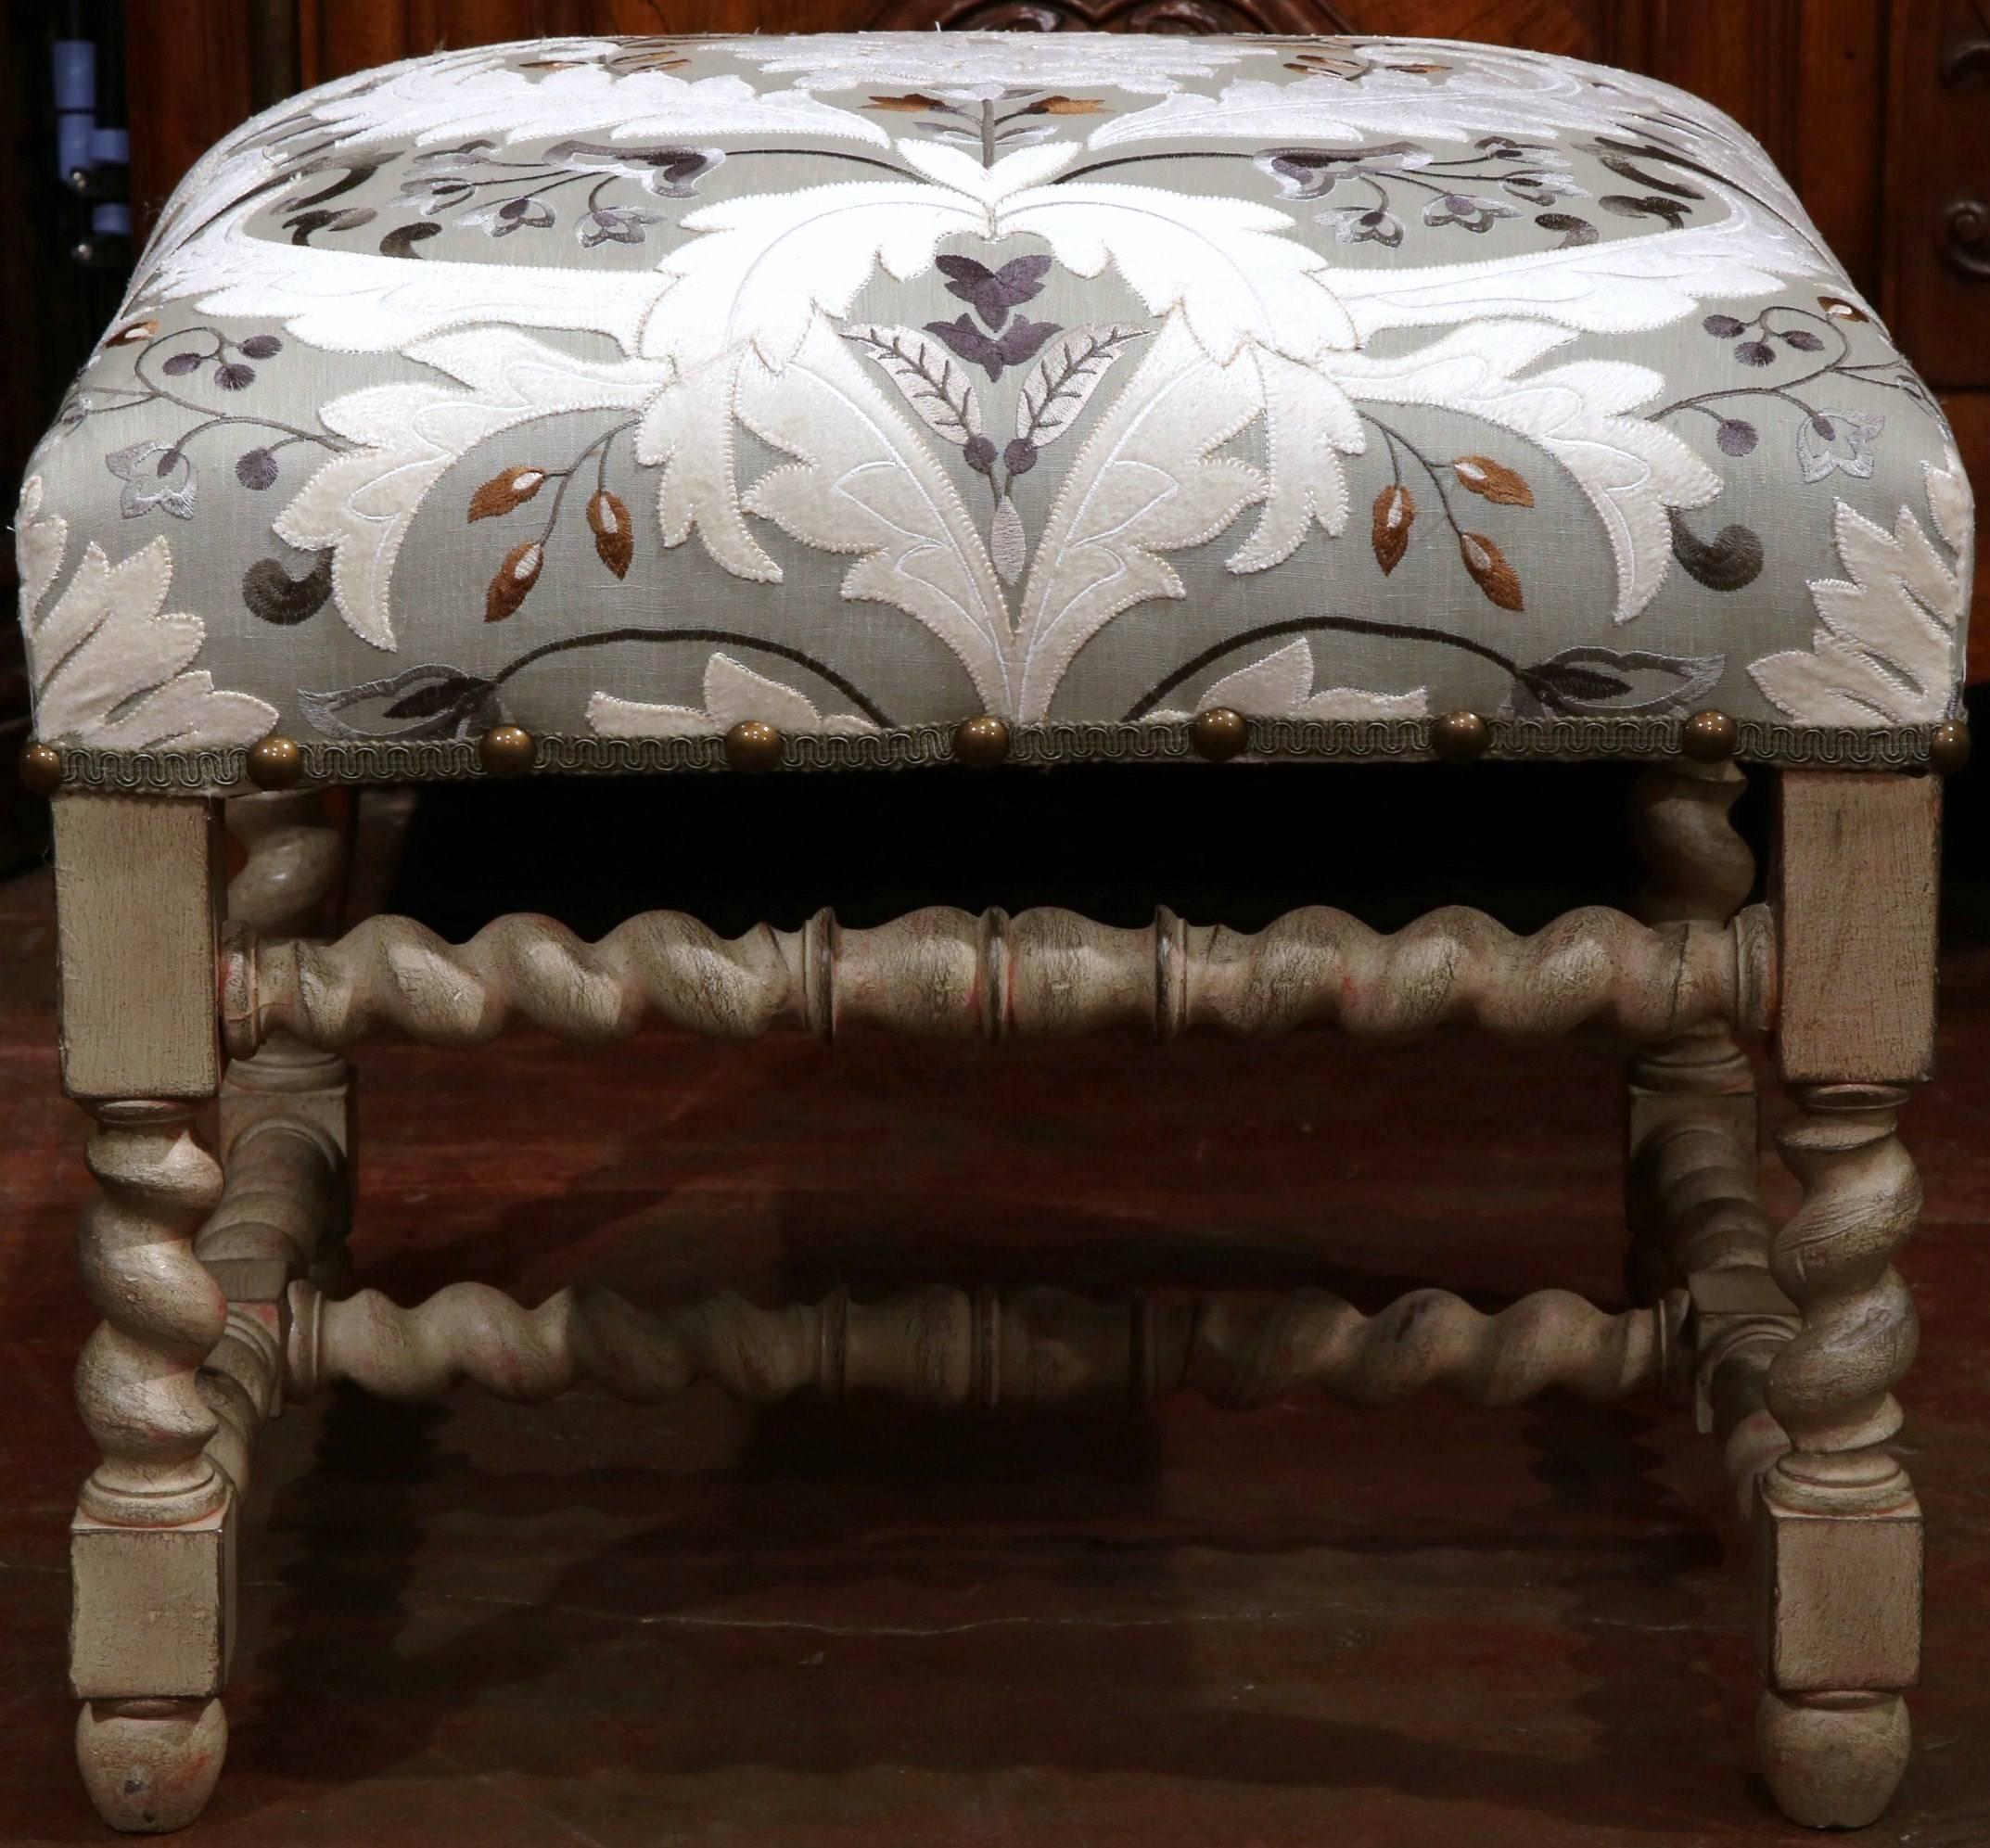 This large, painted stool was crafted in France, circa 1920. Created in the Louis XIII style, this piece has ornate barley twist carved legs with stretcher. The square stool has been reupholstered with embroidered, contemporary fabric decorated with